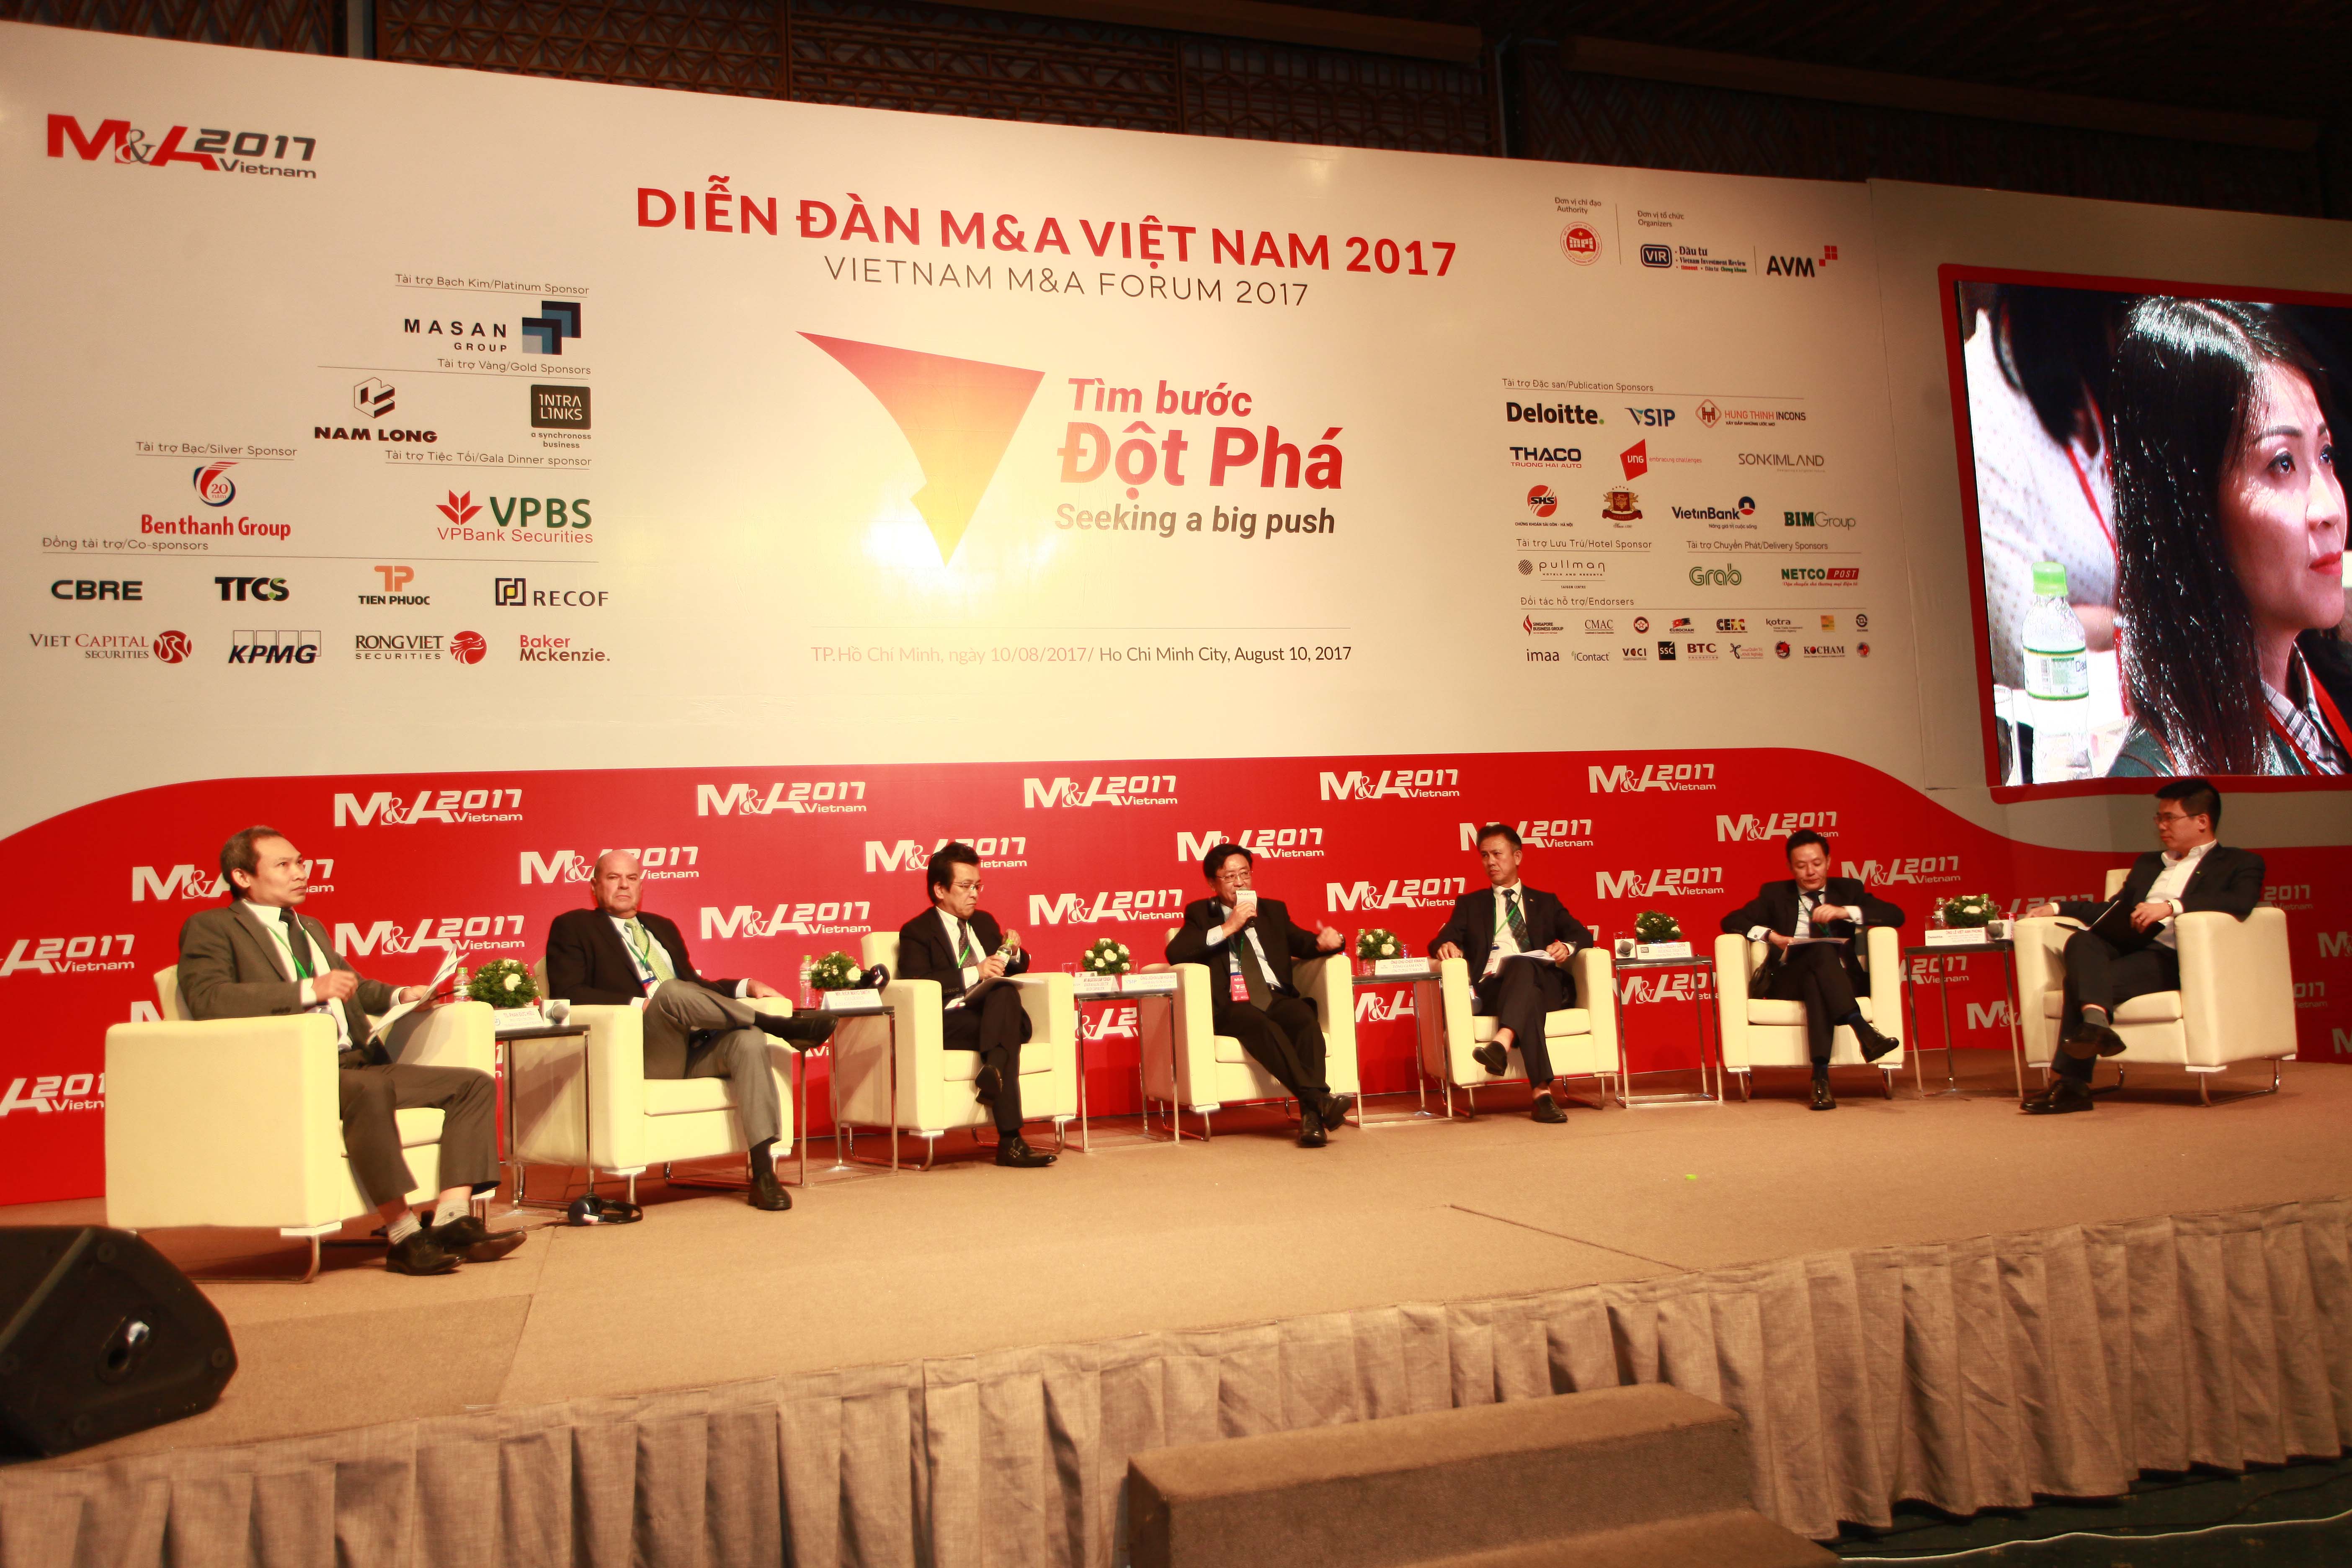 ma forum 2017 second session on international investors perspective